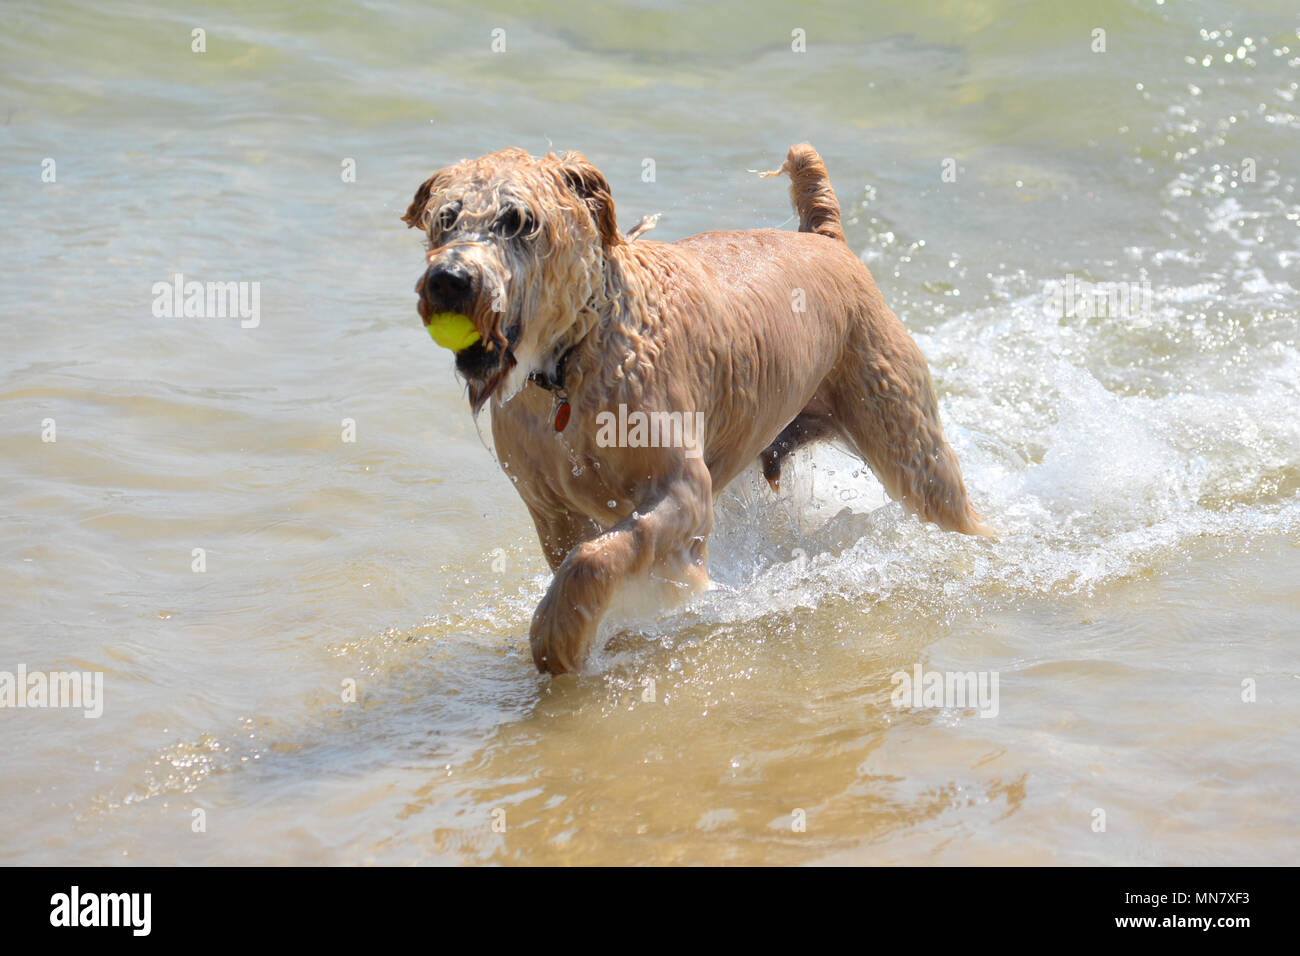 12 year old Spence the terrier dog carrying a ball and running in the sea in warm sunshine at Sandbanks Beach, Poole Stock Photo